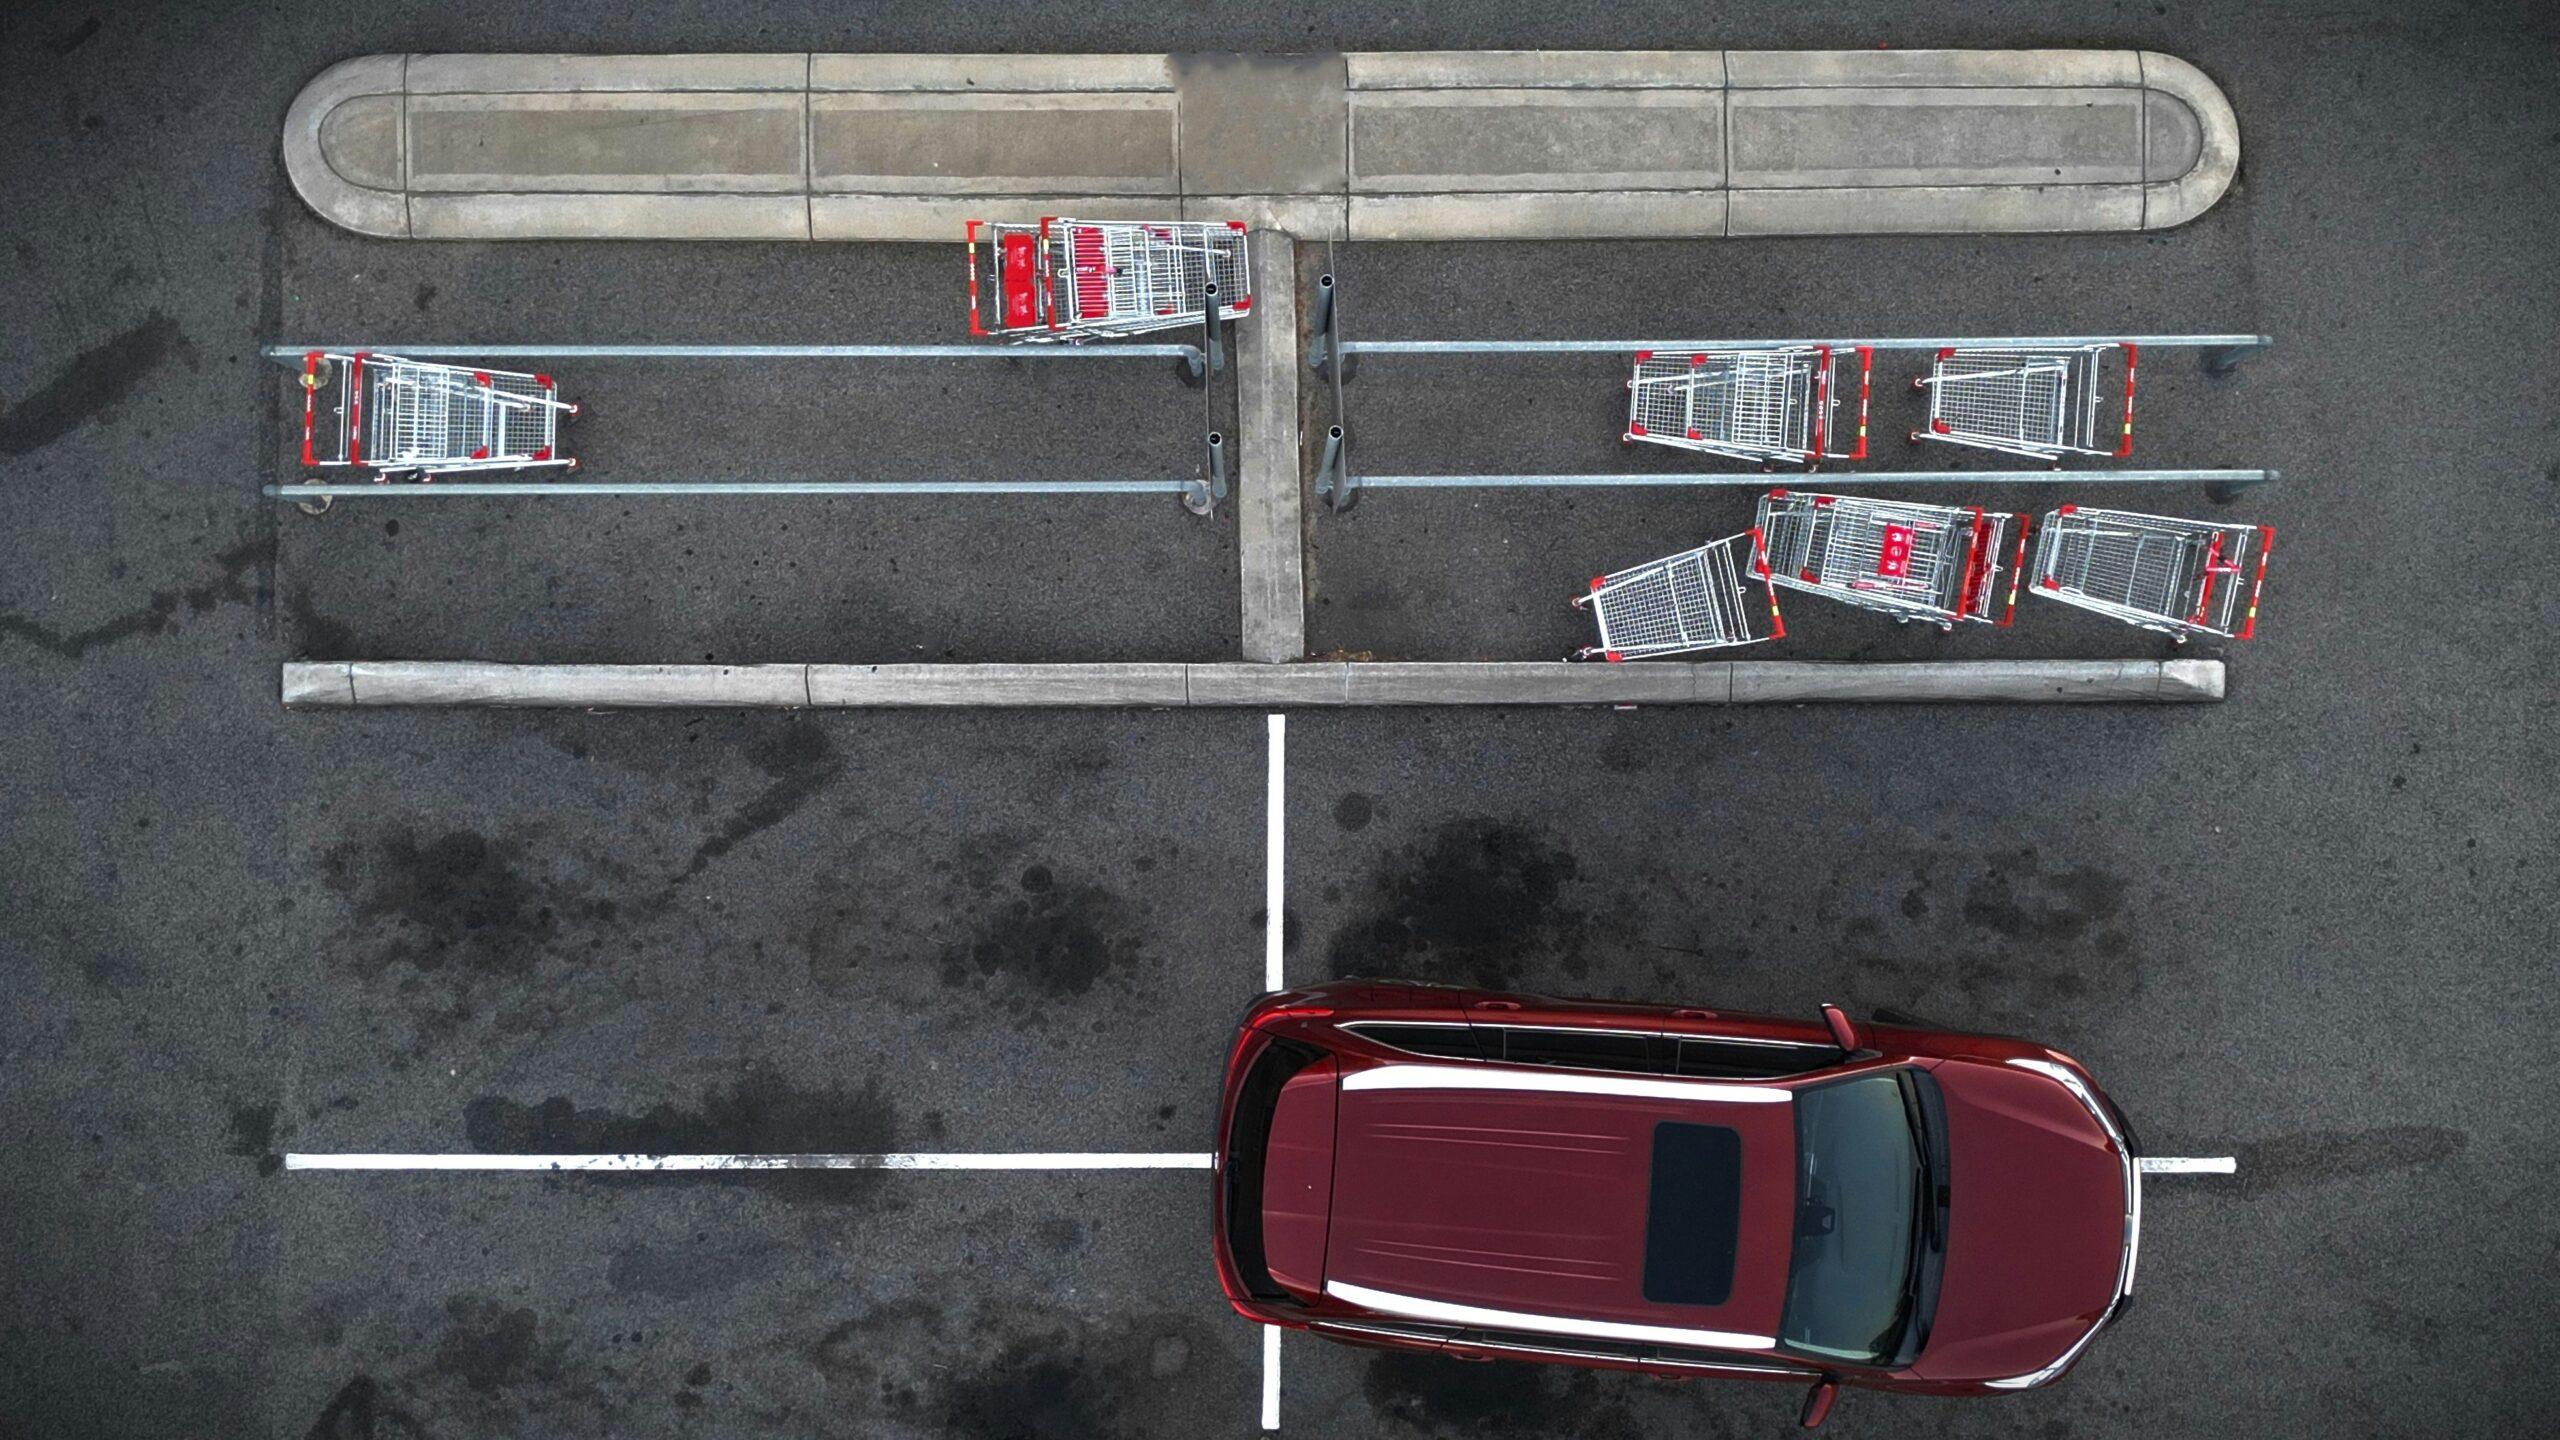 Aerial of a maroon-coloured car parked across several parking spots in a car park complete with shopping trolleys.